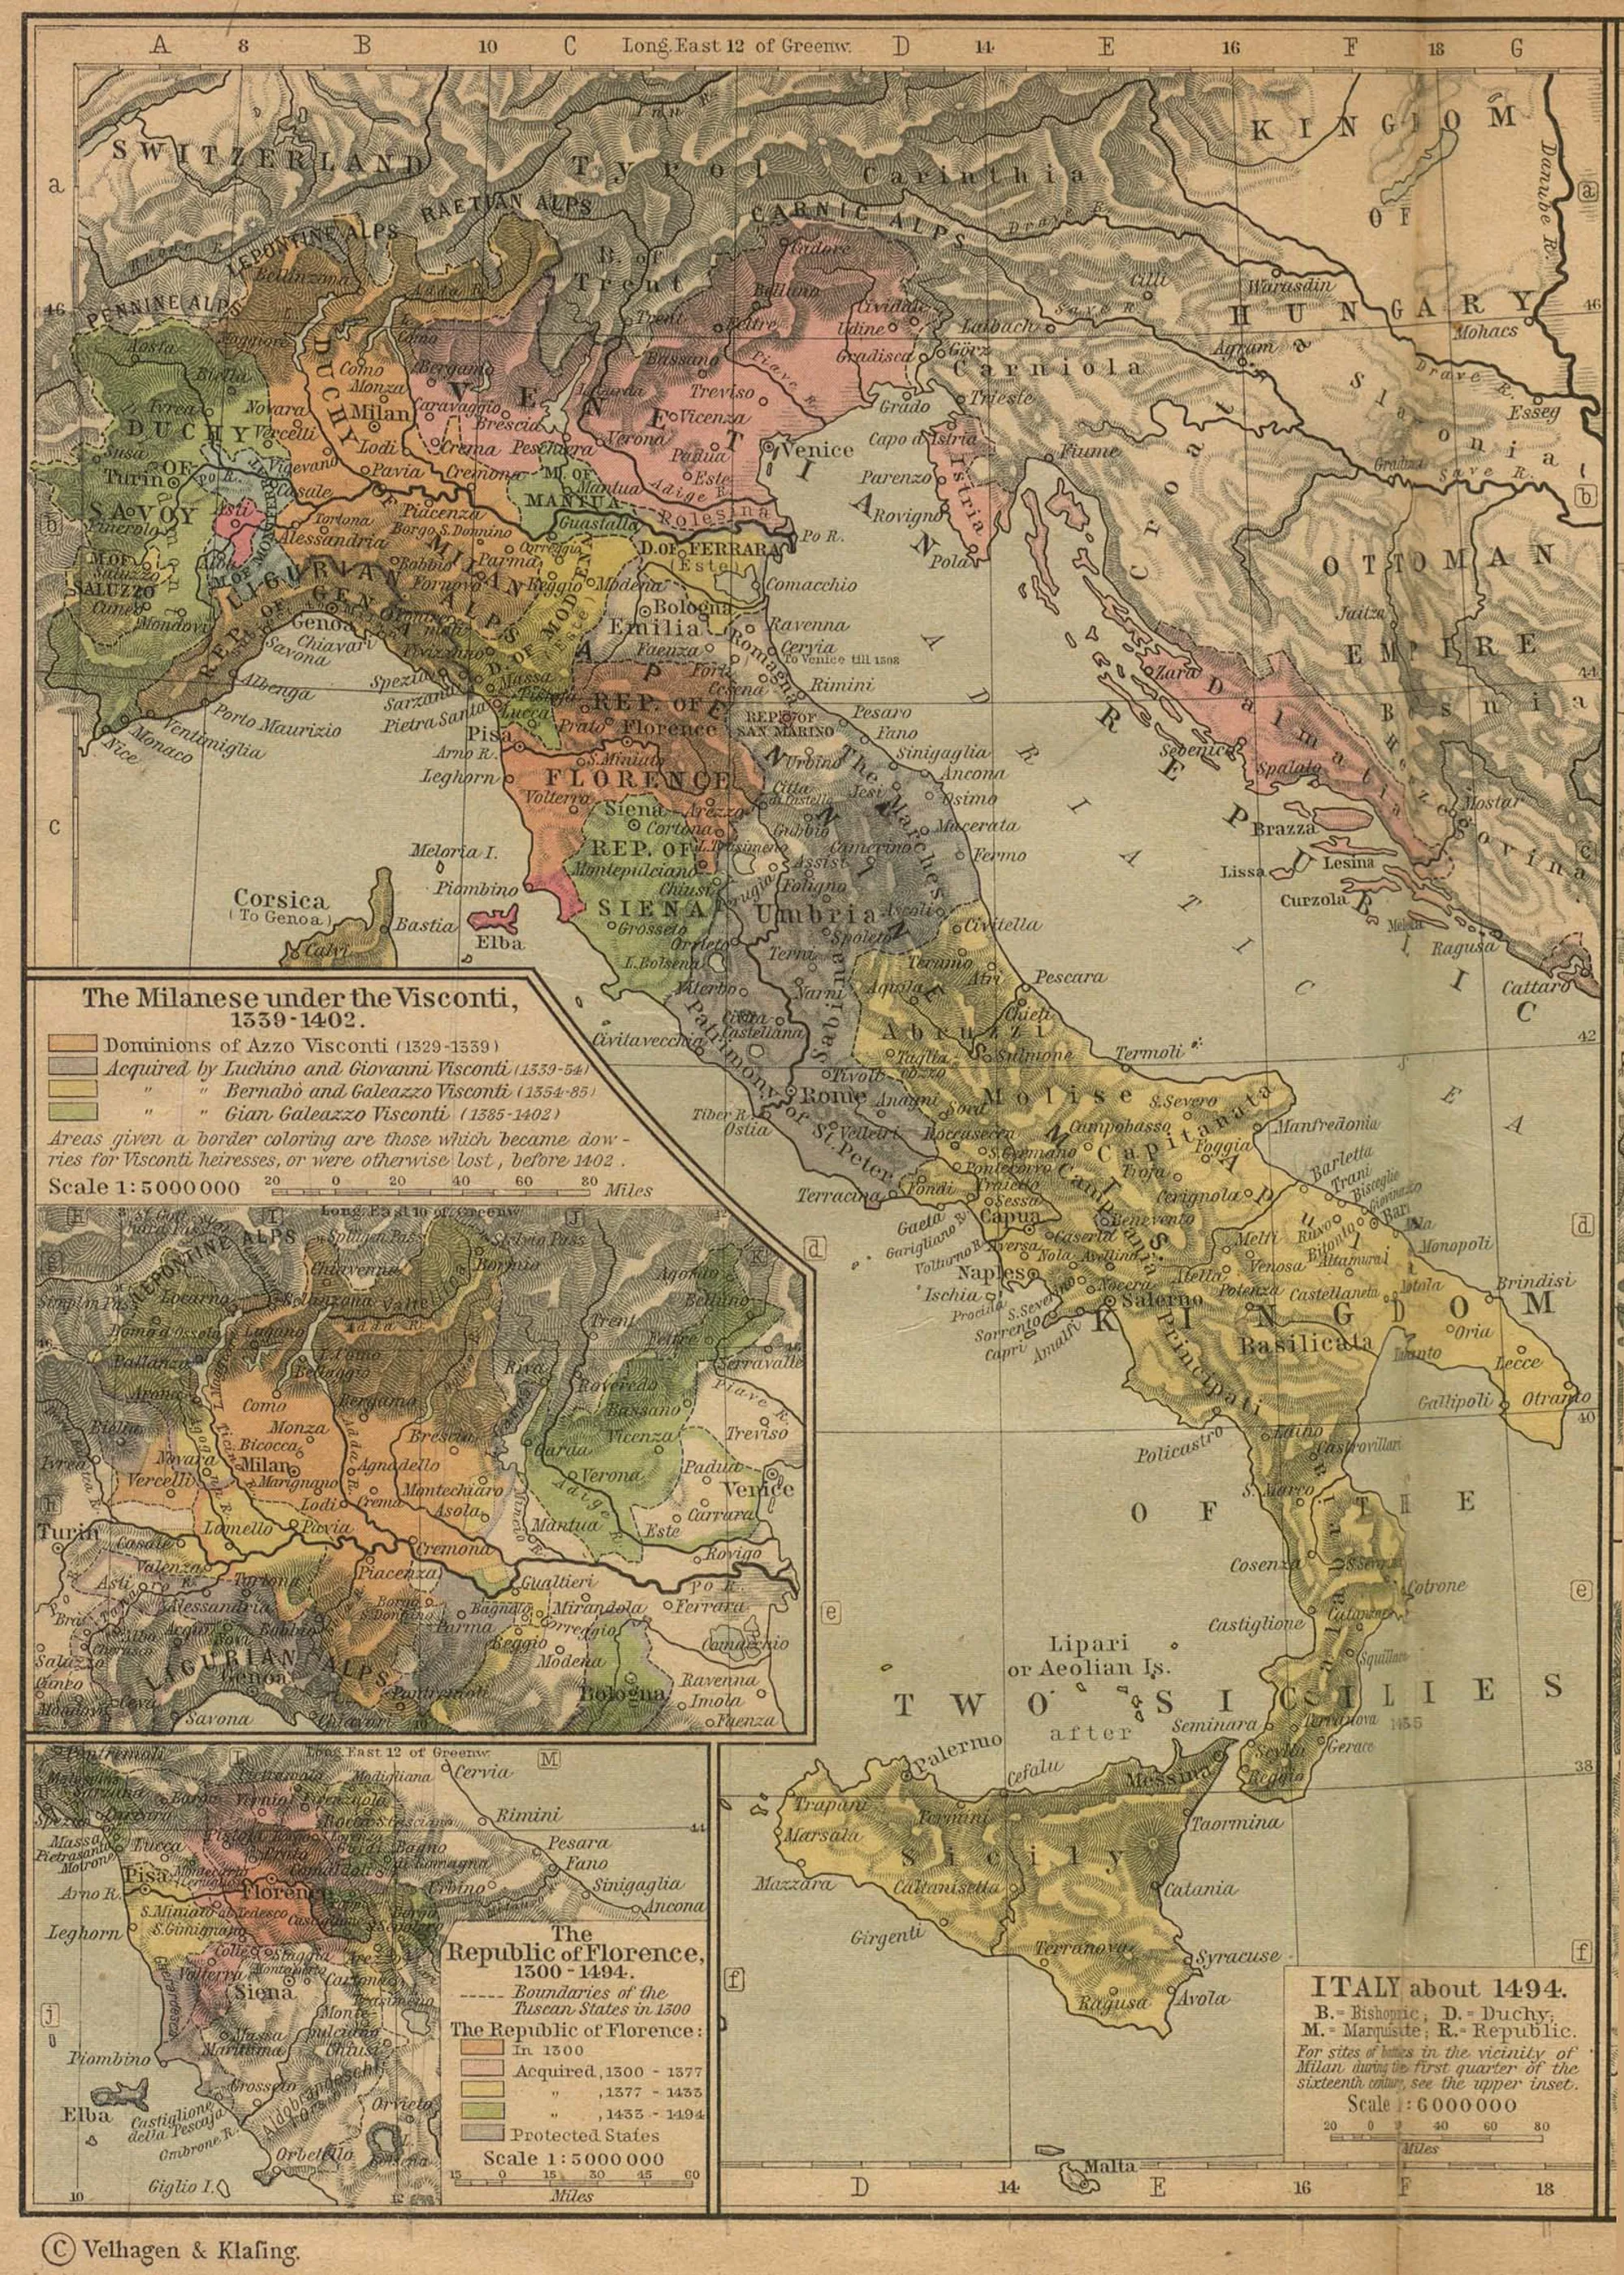 “Italy about 1494,” illustration by William R. Shepherd.